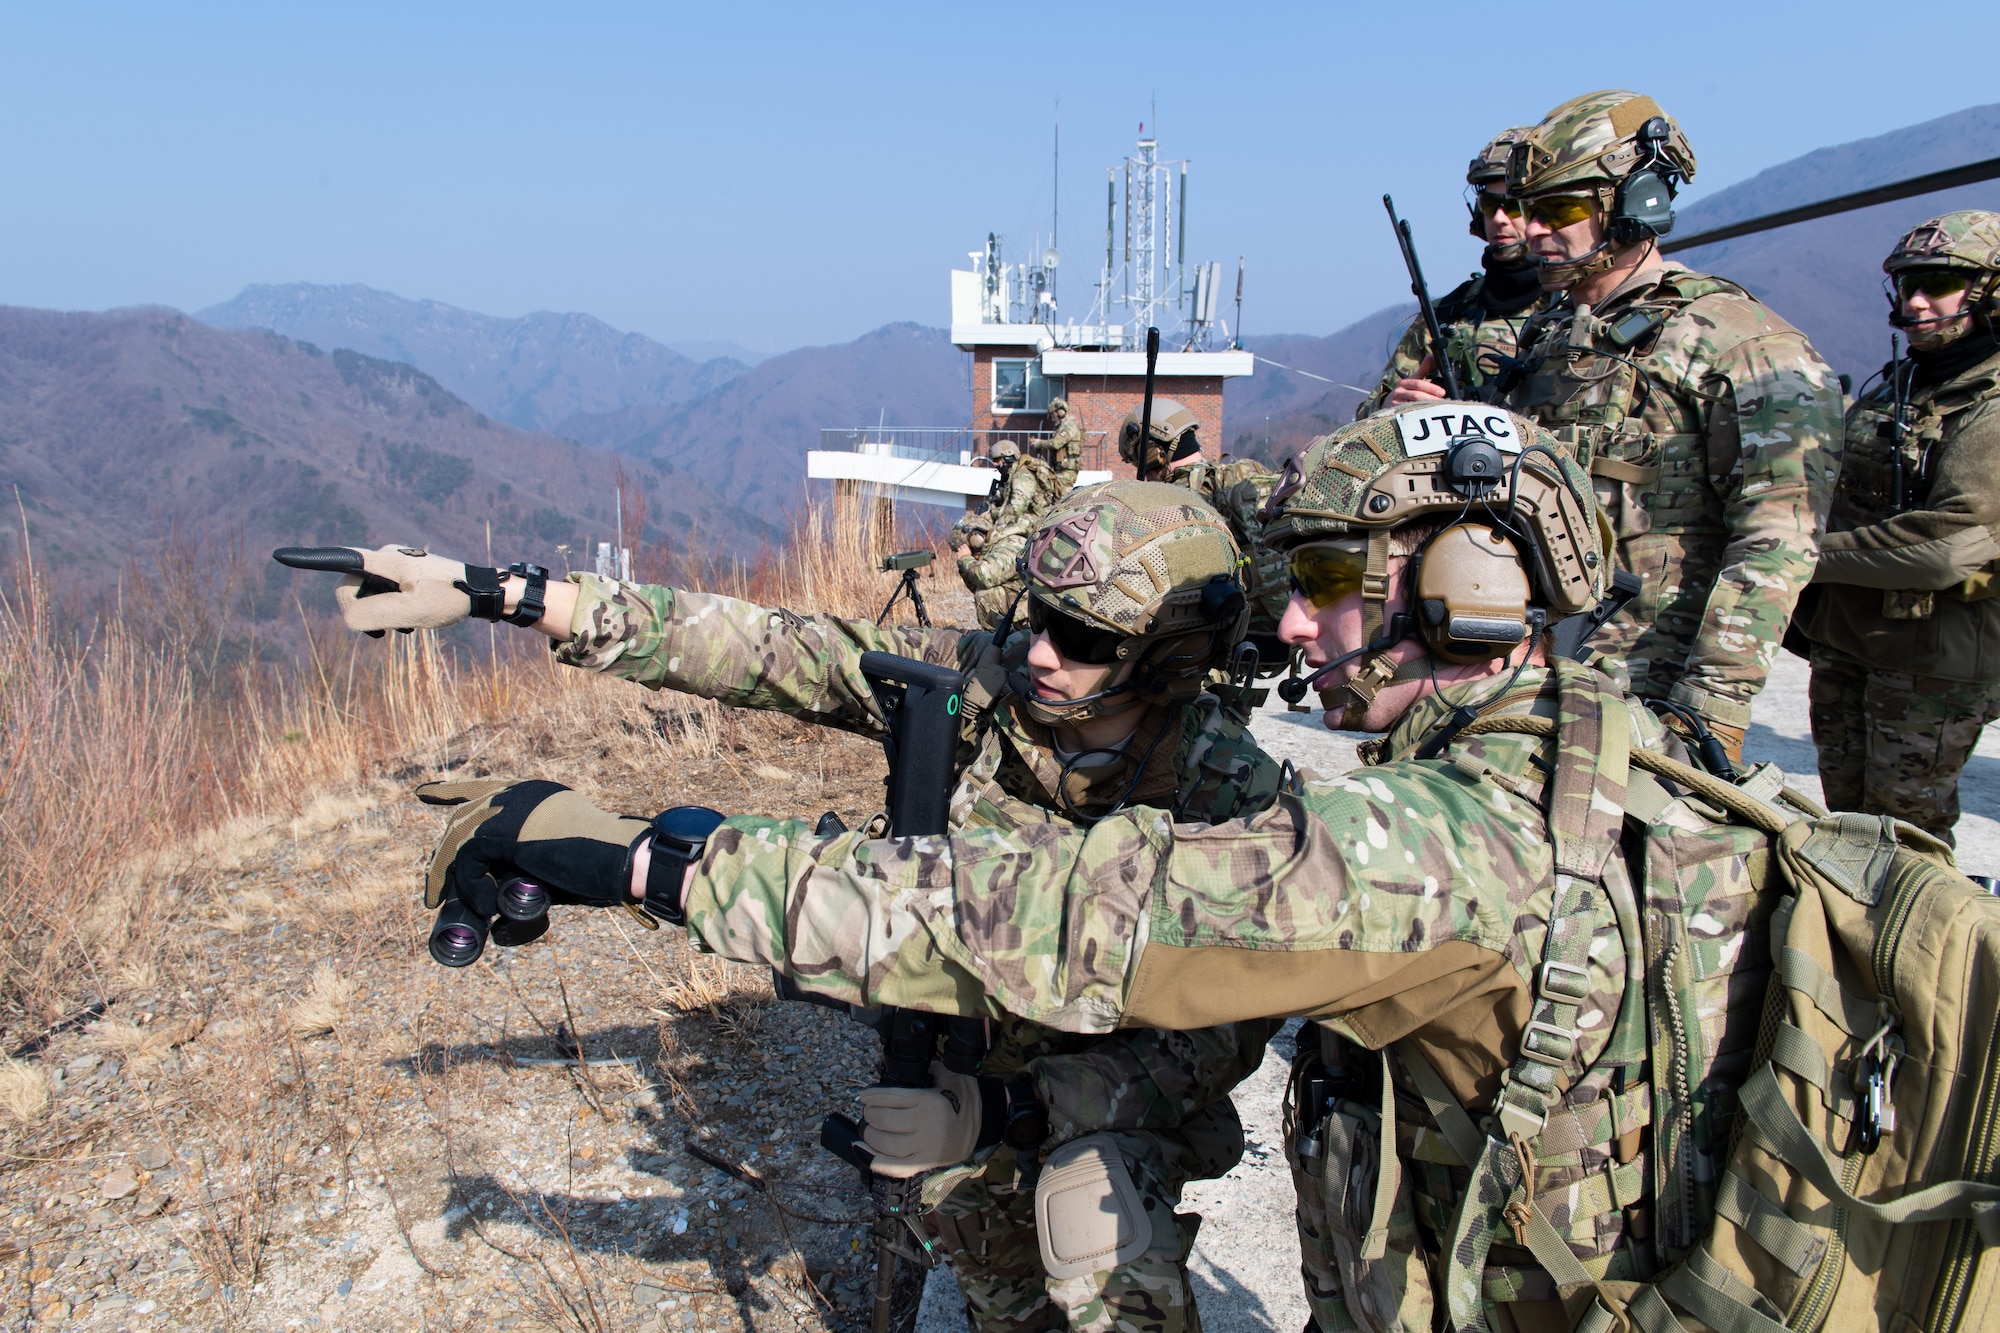 U.S. Air Force joint terminal attack controllers assigned to the 604th Air Support Operations Squadron and 607th Air Support Operations Group make an assessment prior to calling in an A-10 Thunderbolt II strafing run during close air support training at the Pilsung Range in Gangwan Province, Republic of Korea, Feb. 14, 2019.